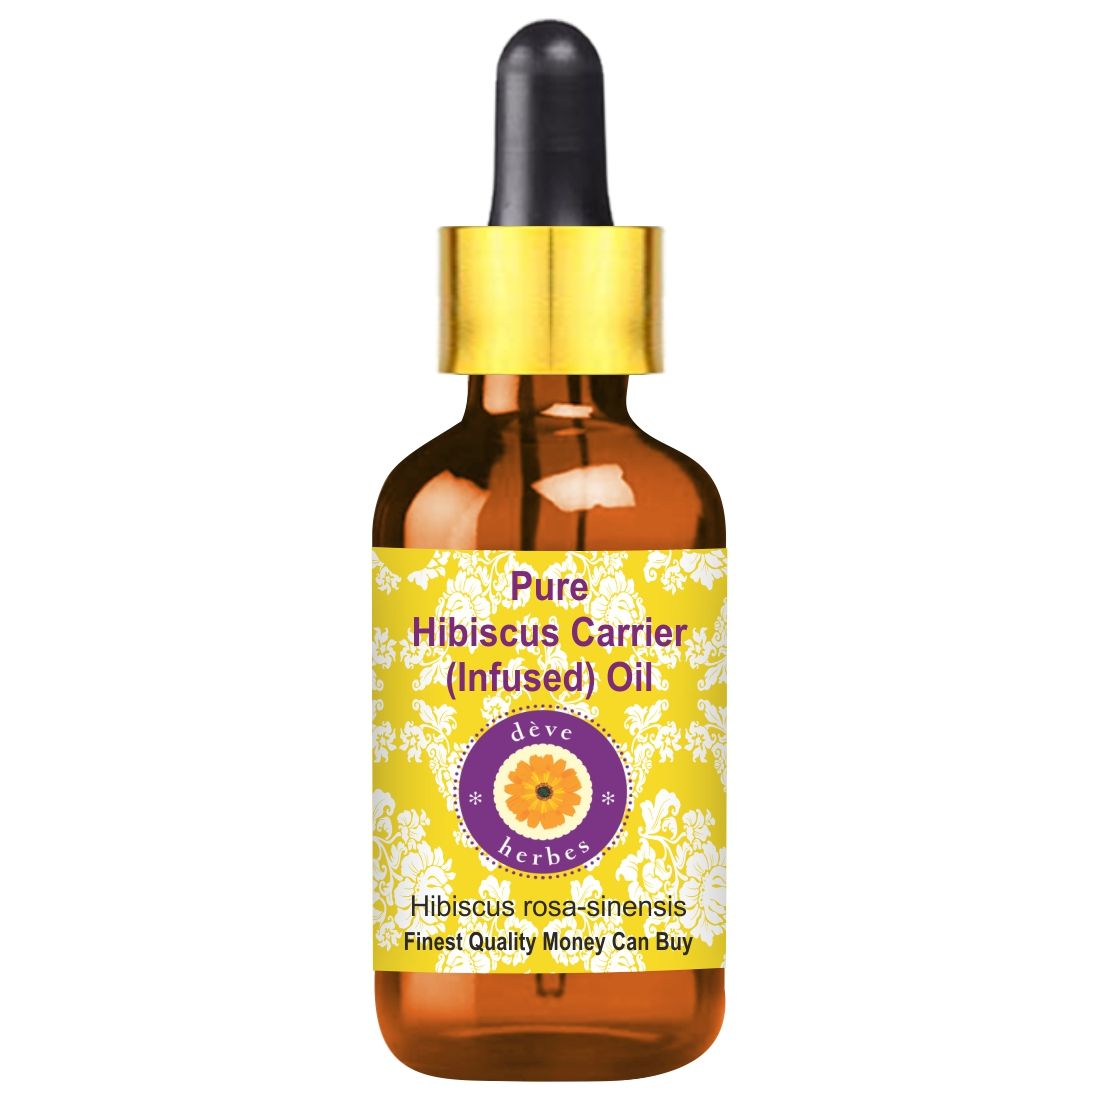 Deve Herbes Pure Hibiscus Carrier (Infused) Oil (Hibiscus rosa-sinensis) for Skin & Hair Health